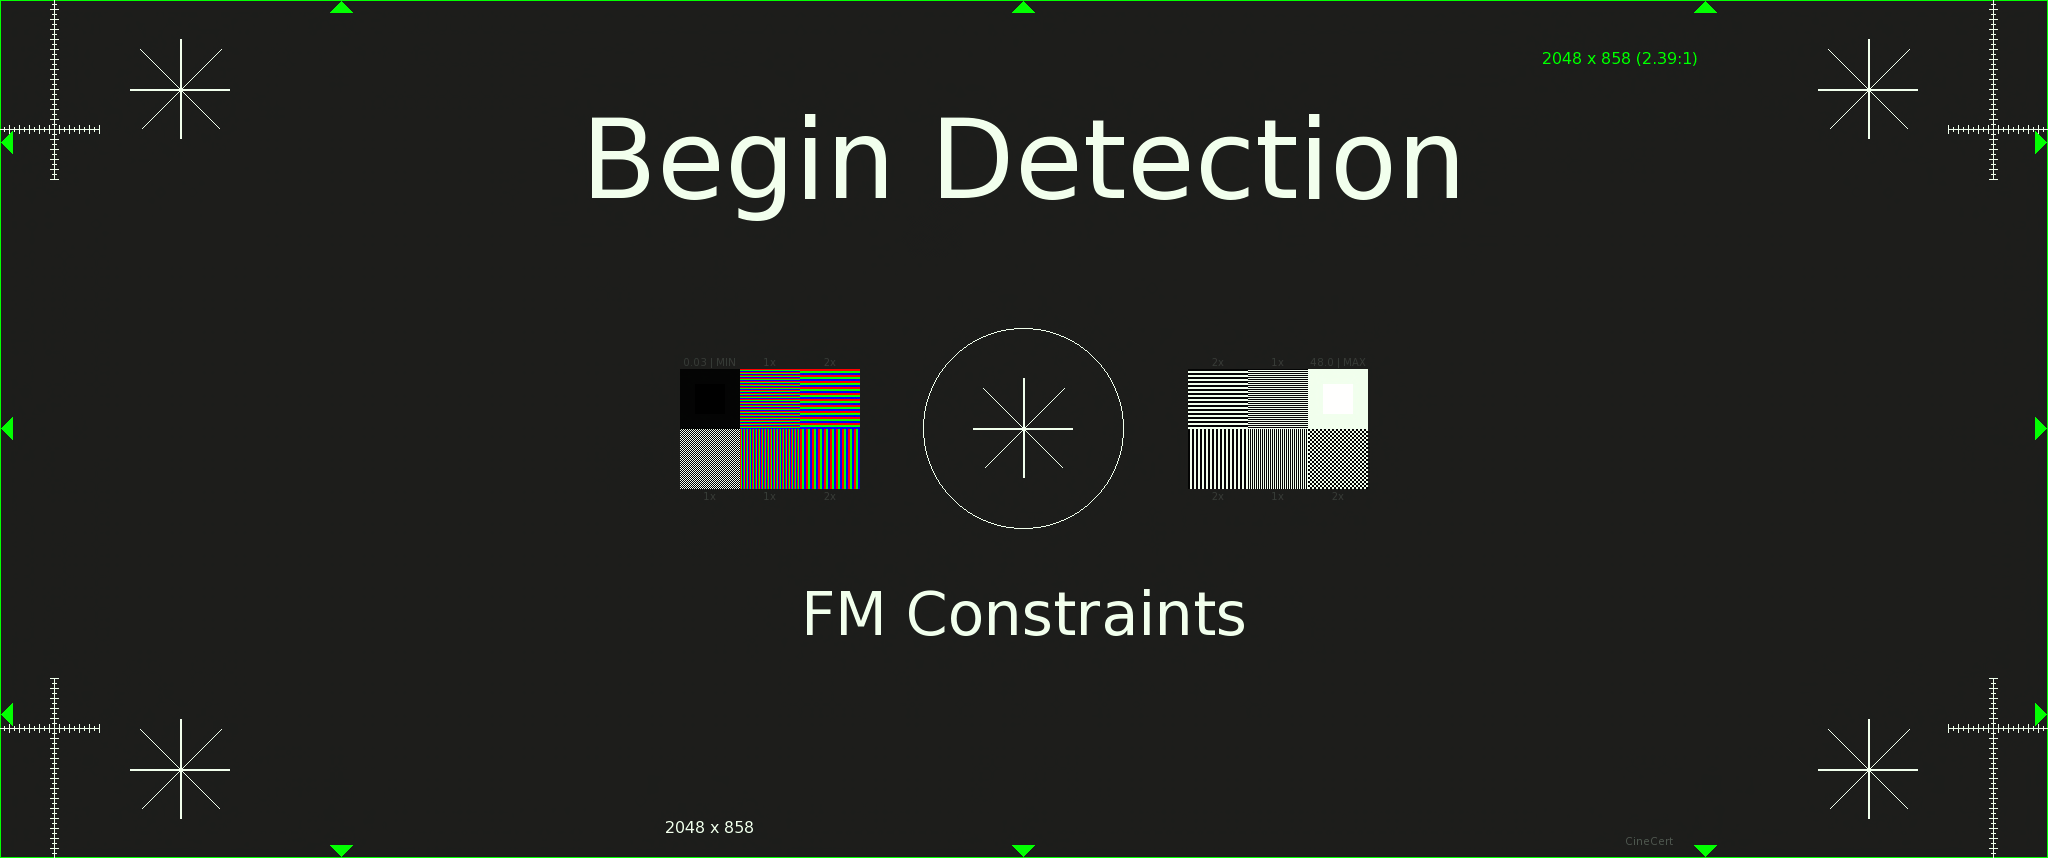 Test pattern with the text: Begin Detection